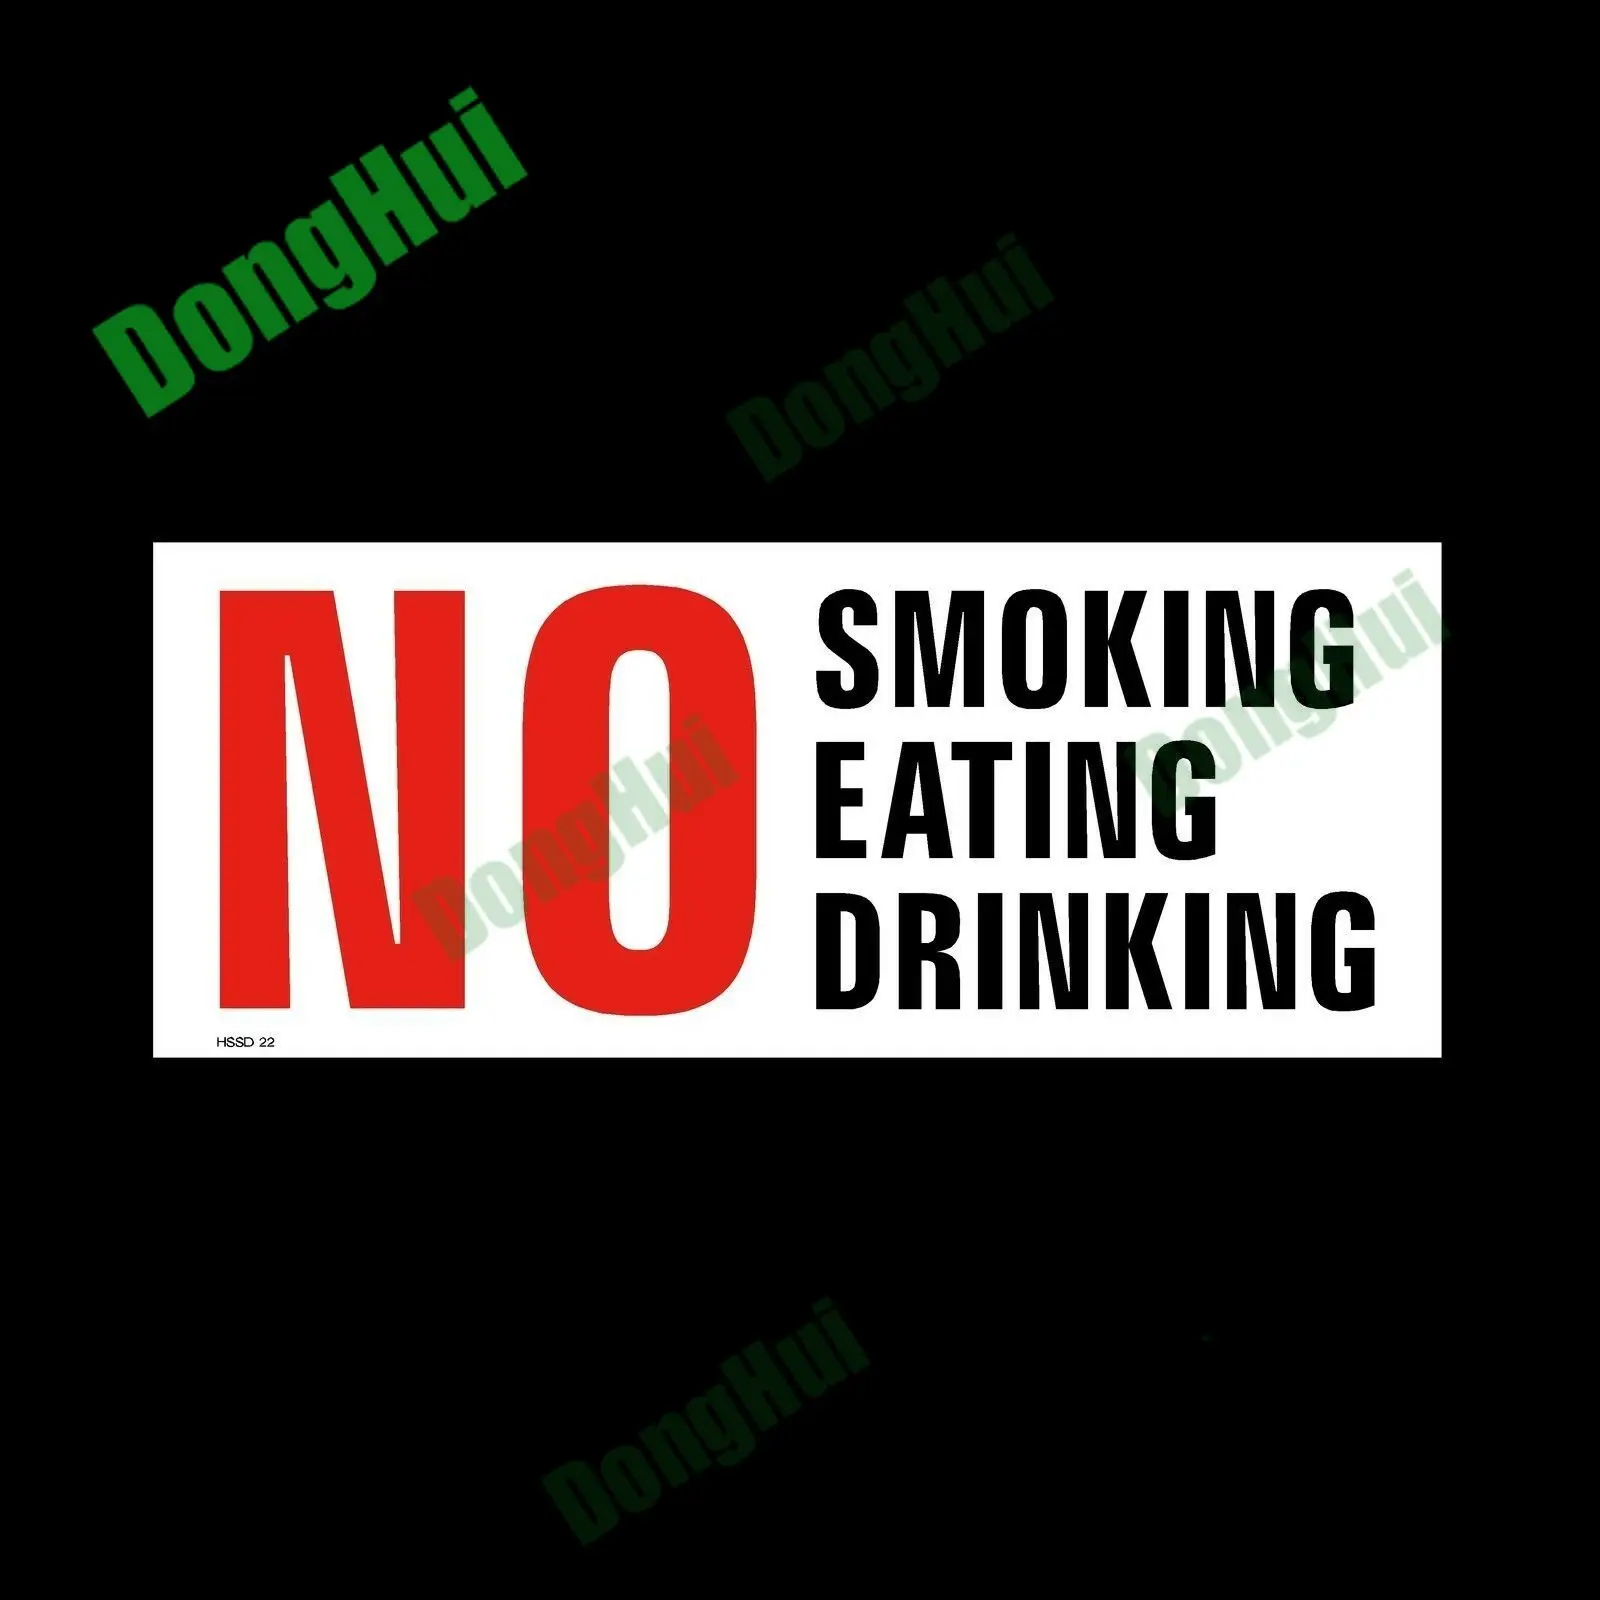 

No Smoking, Eating, Drinking Label Plastic Sign Warning Caution Danger Adhesive Car Sticker PVC Waterproof for Public Places